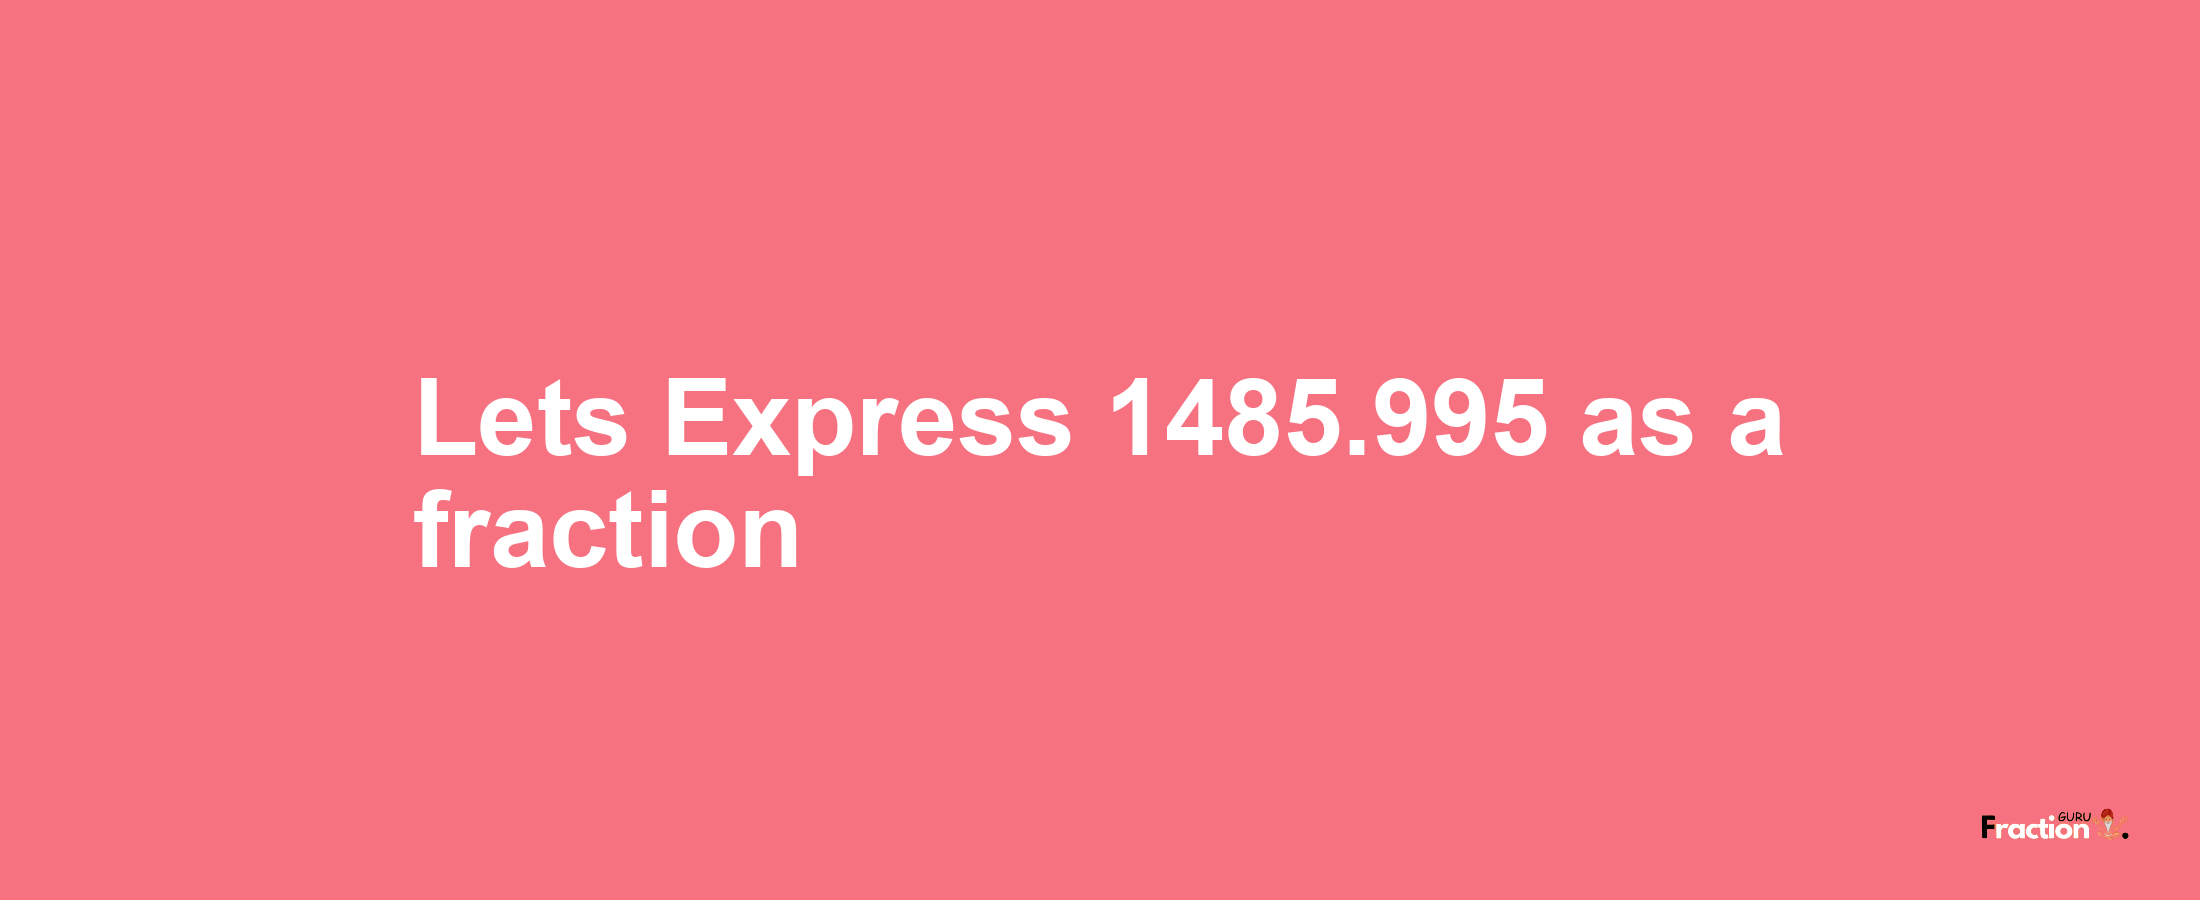 Lets Express 1485.995 as afraction